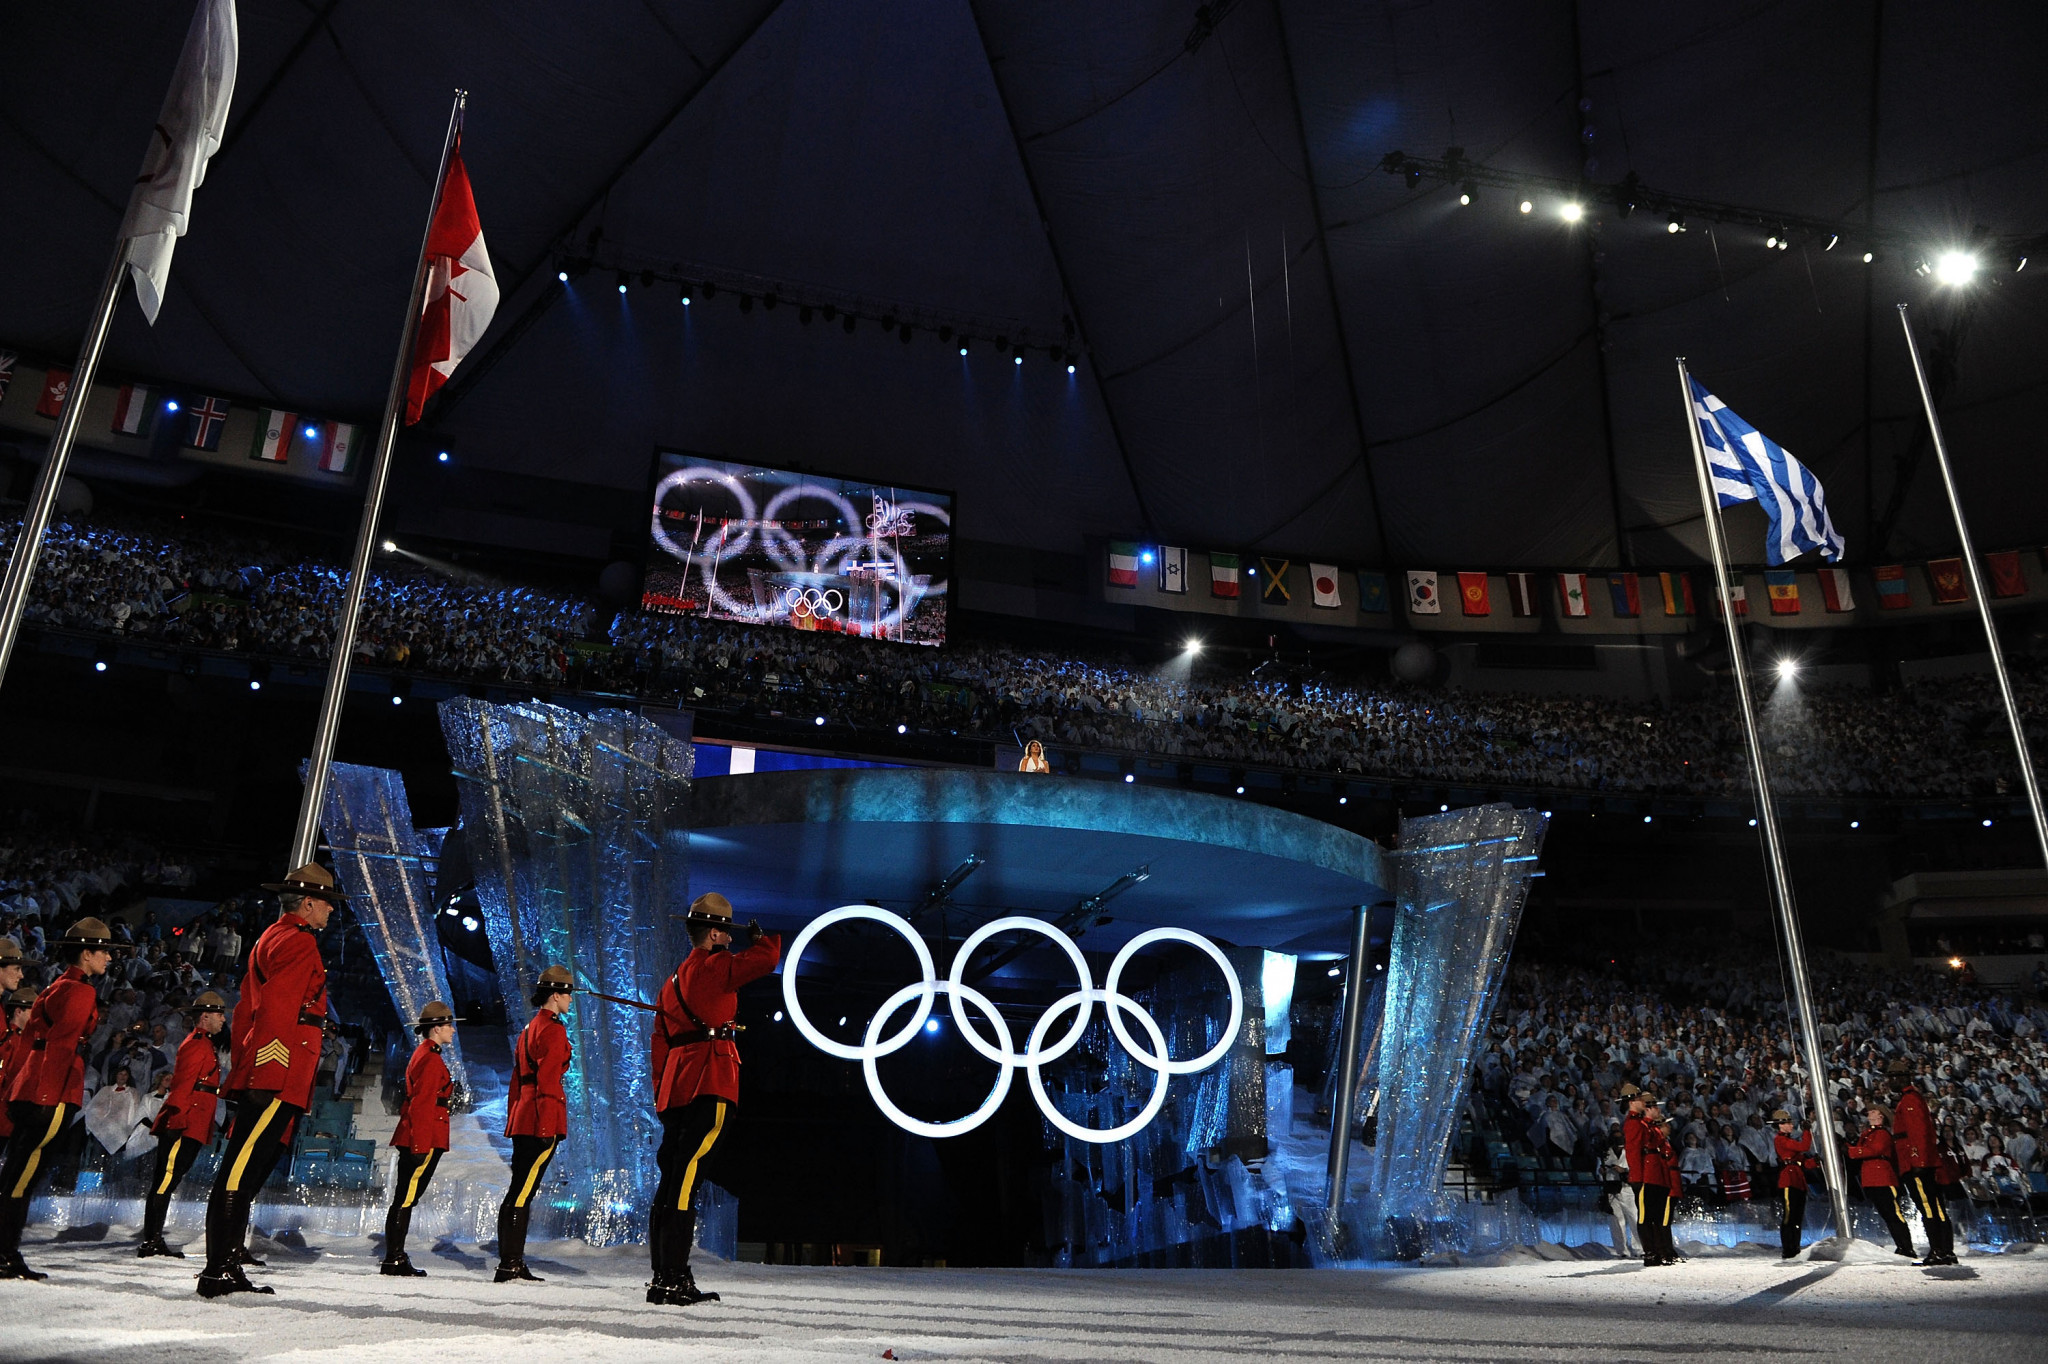 A Vancouver City Council report has cast doubts over the Canadian city staging the Winter Olympics for the first time since 2010 ©Getty Images